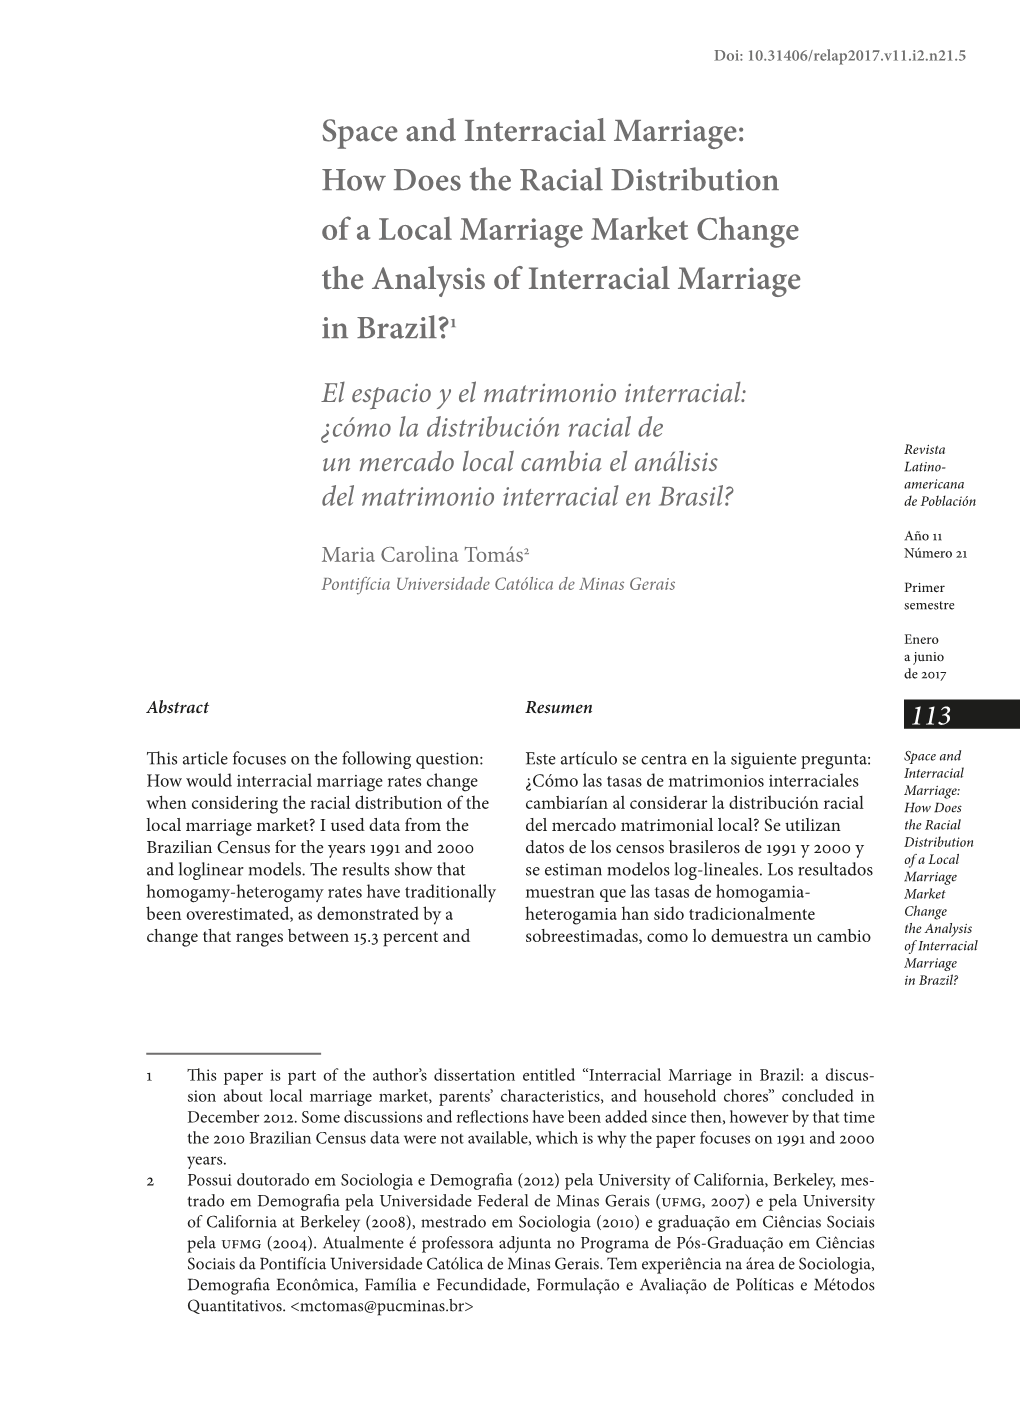 How Does the Racial Distribution of a Local Marriage Market Change the Analysis of Interracial Marriage in Brazil?1